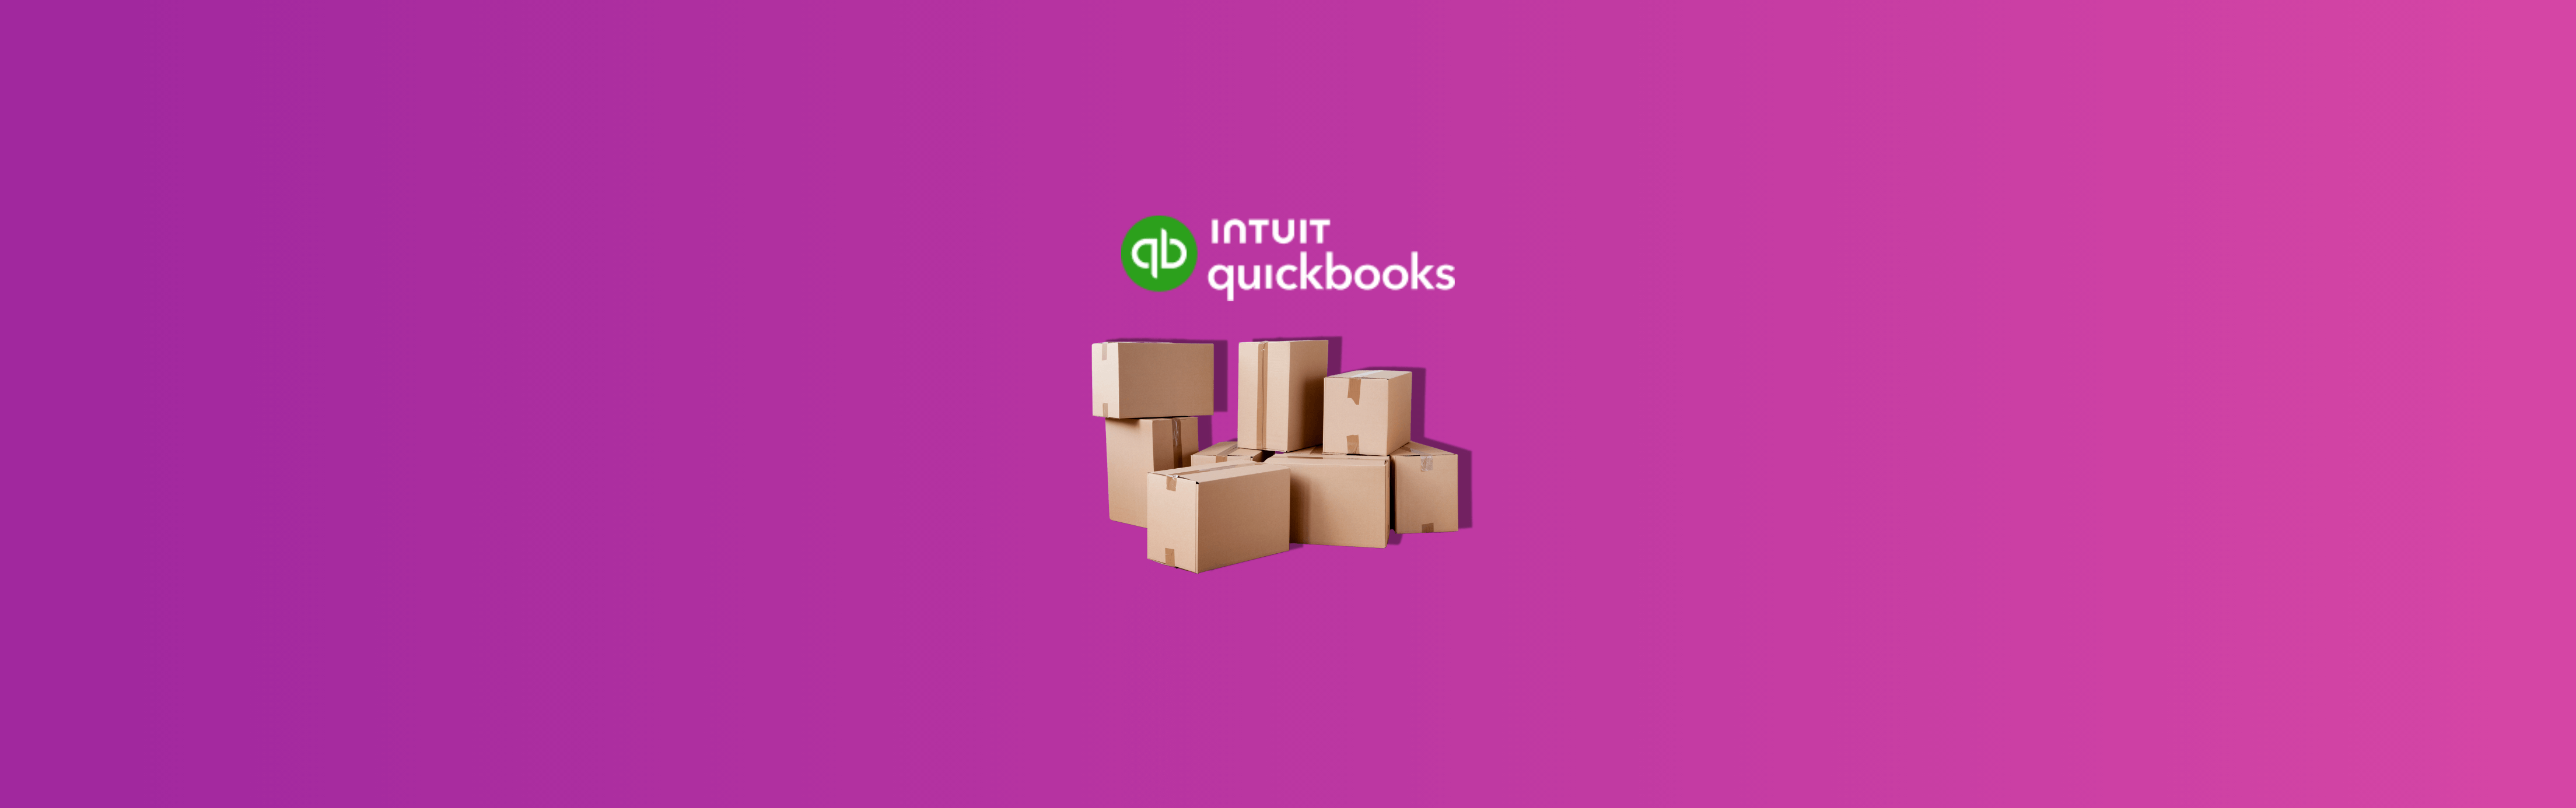 Inventory Management: QuickBooks Inventory Tracking Solutions